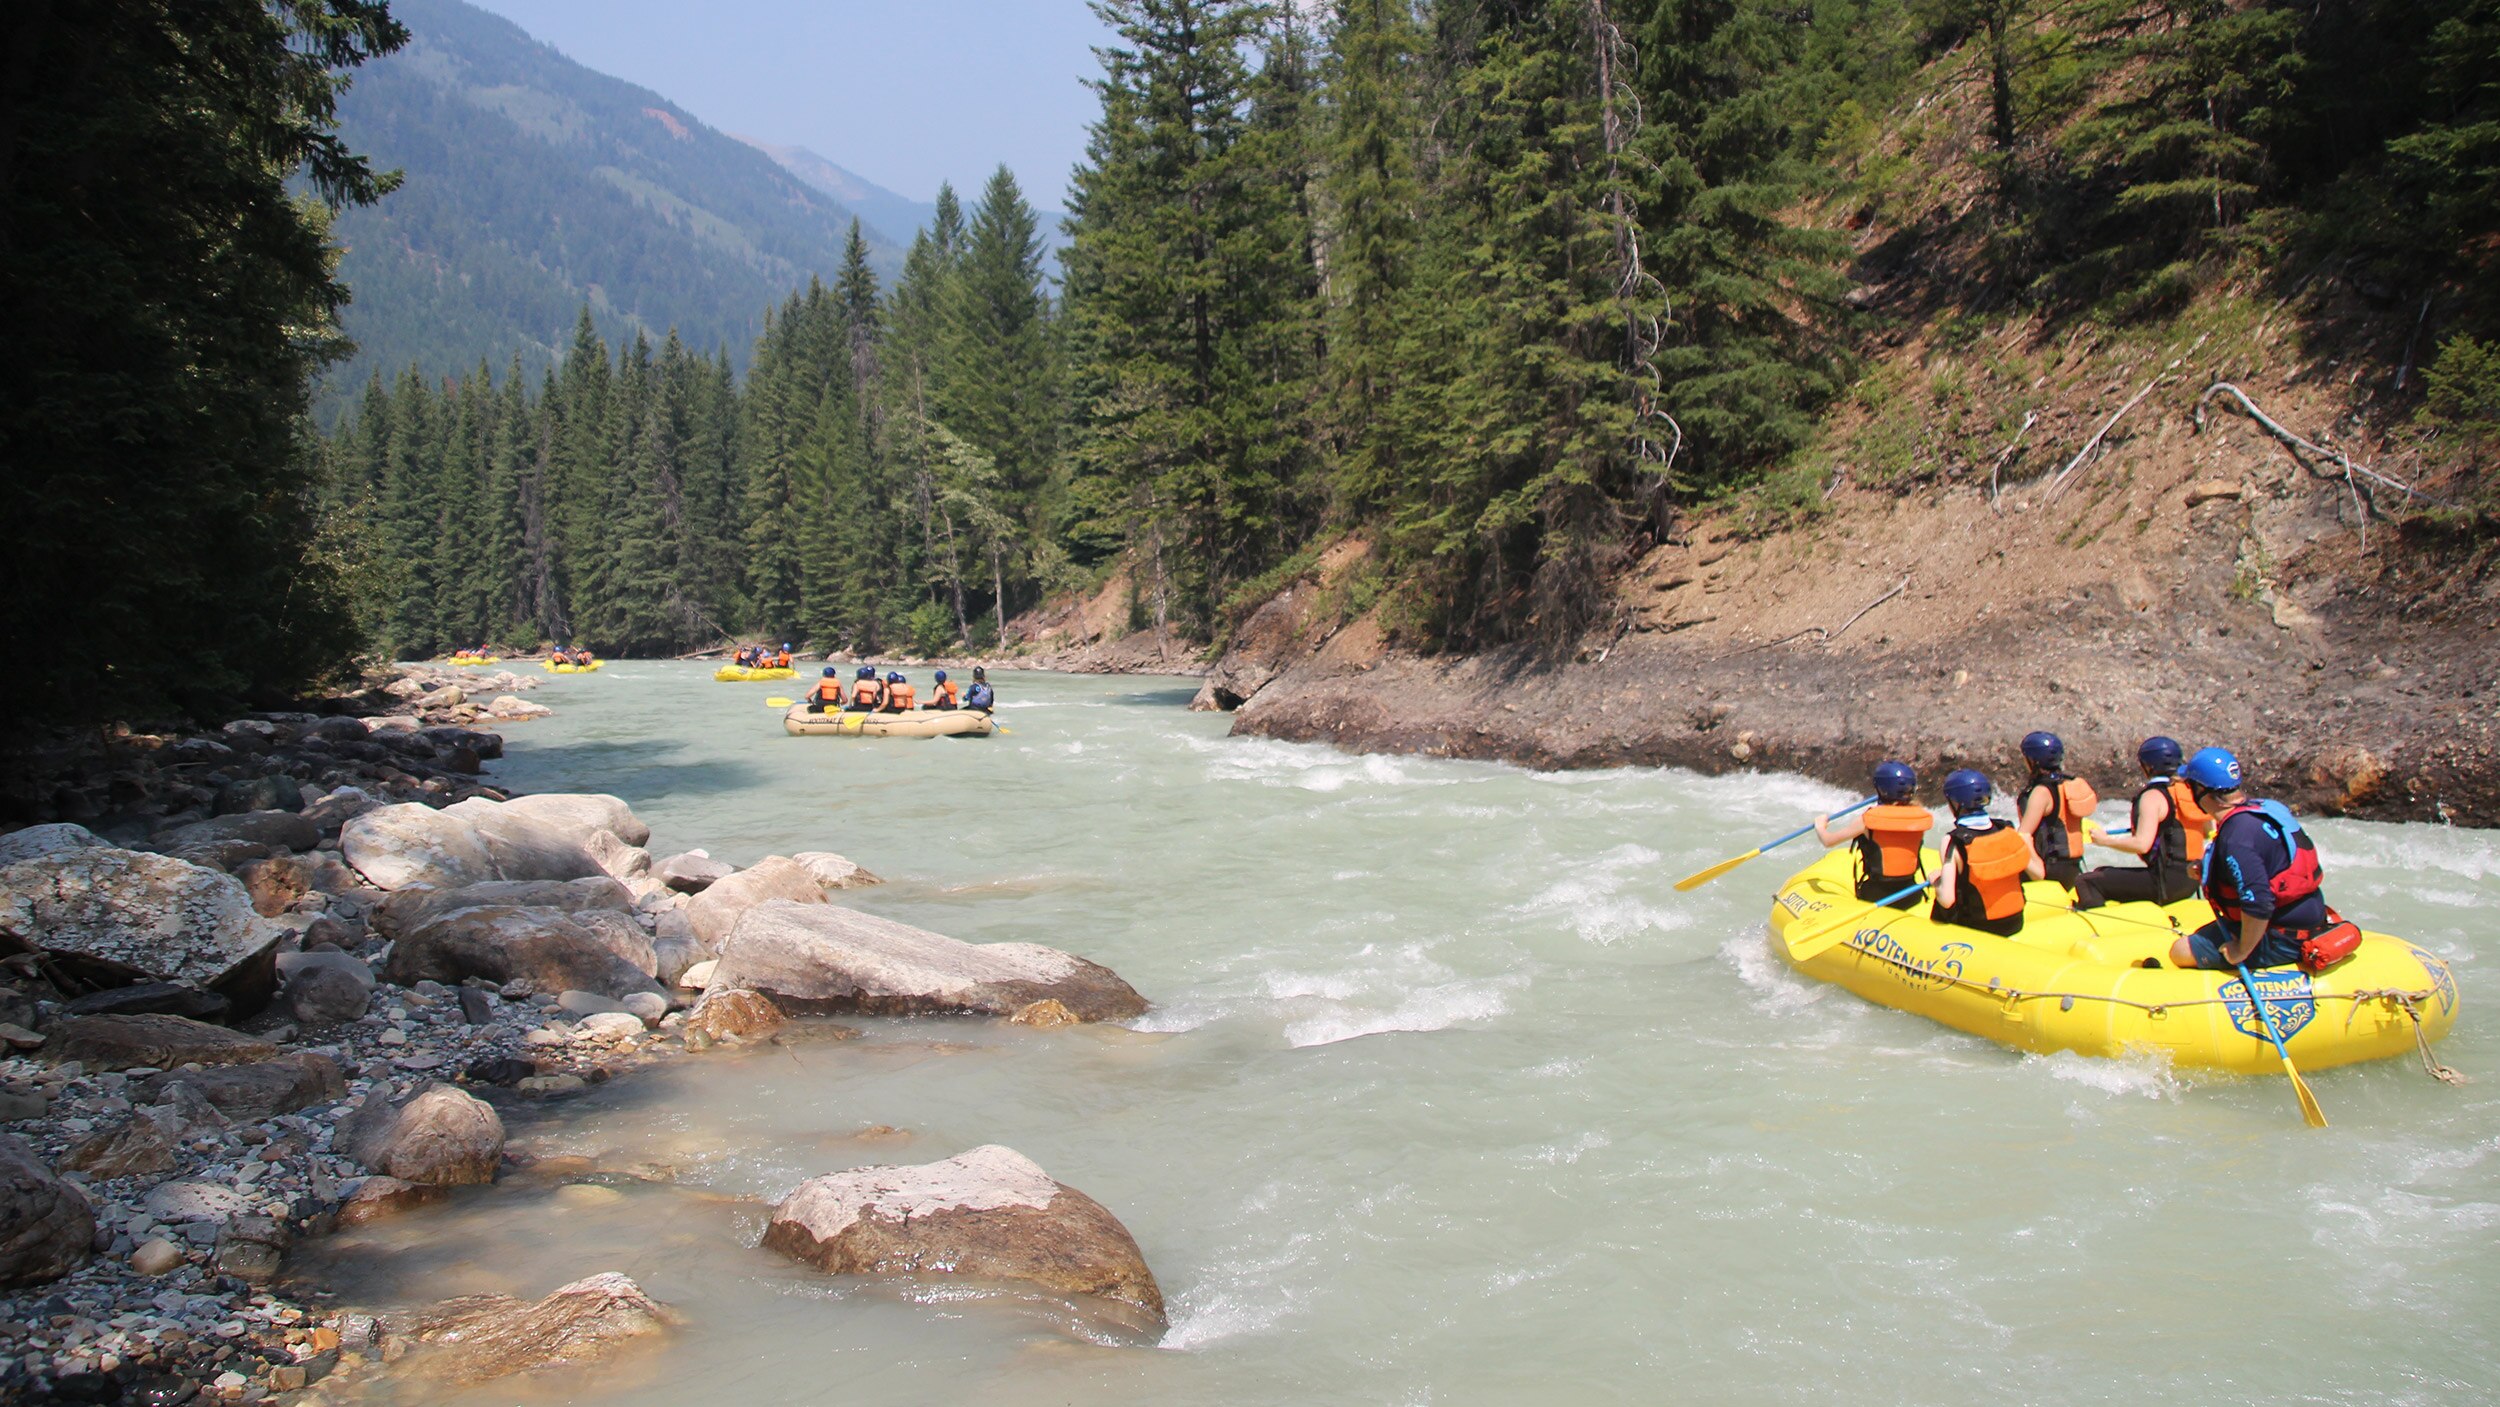 Groups of people rafting in a river